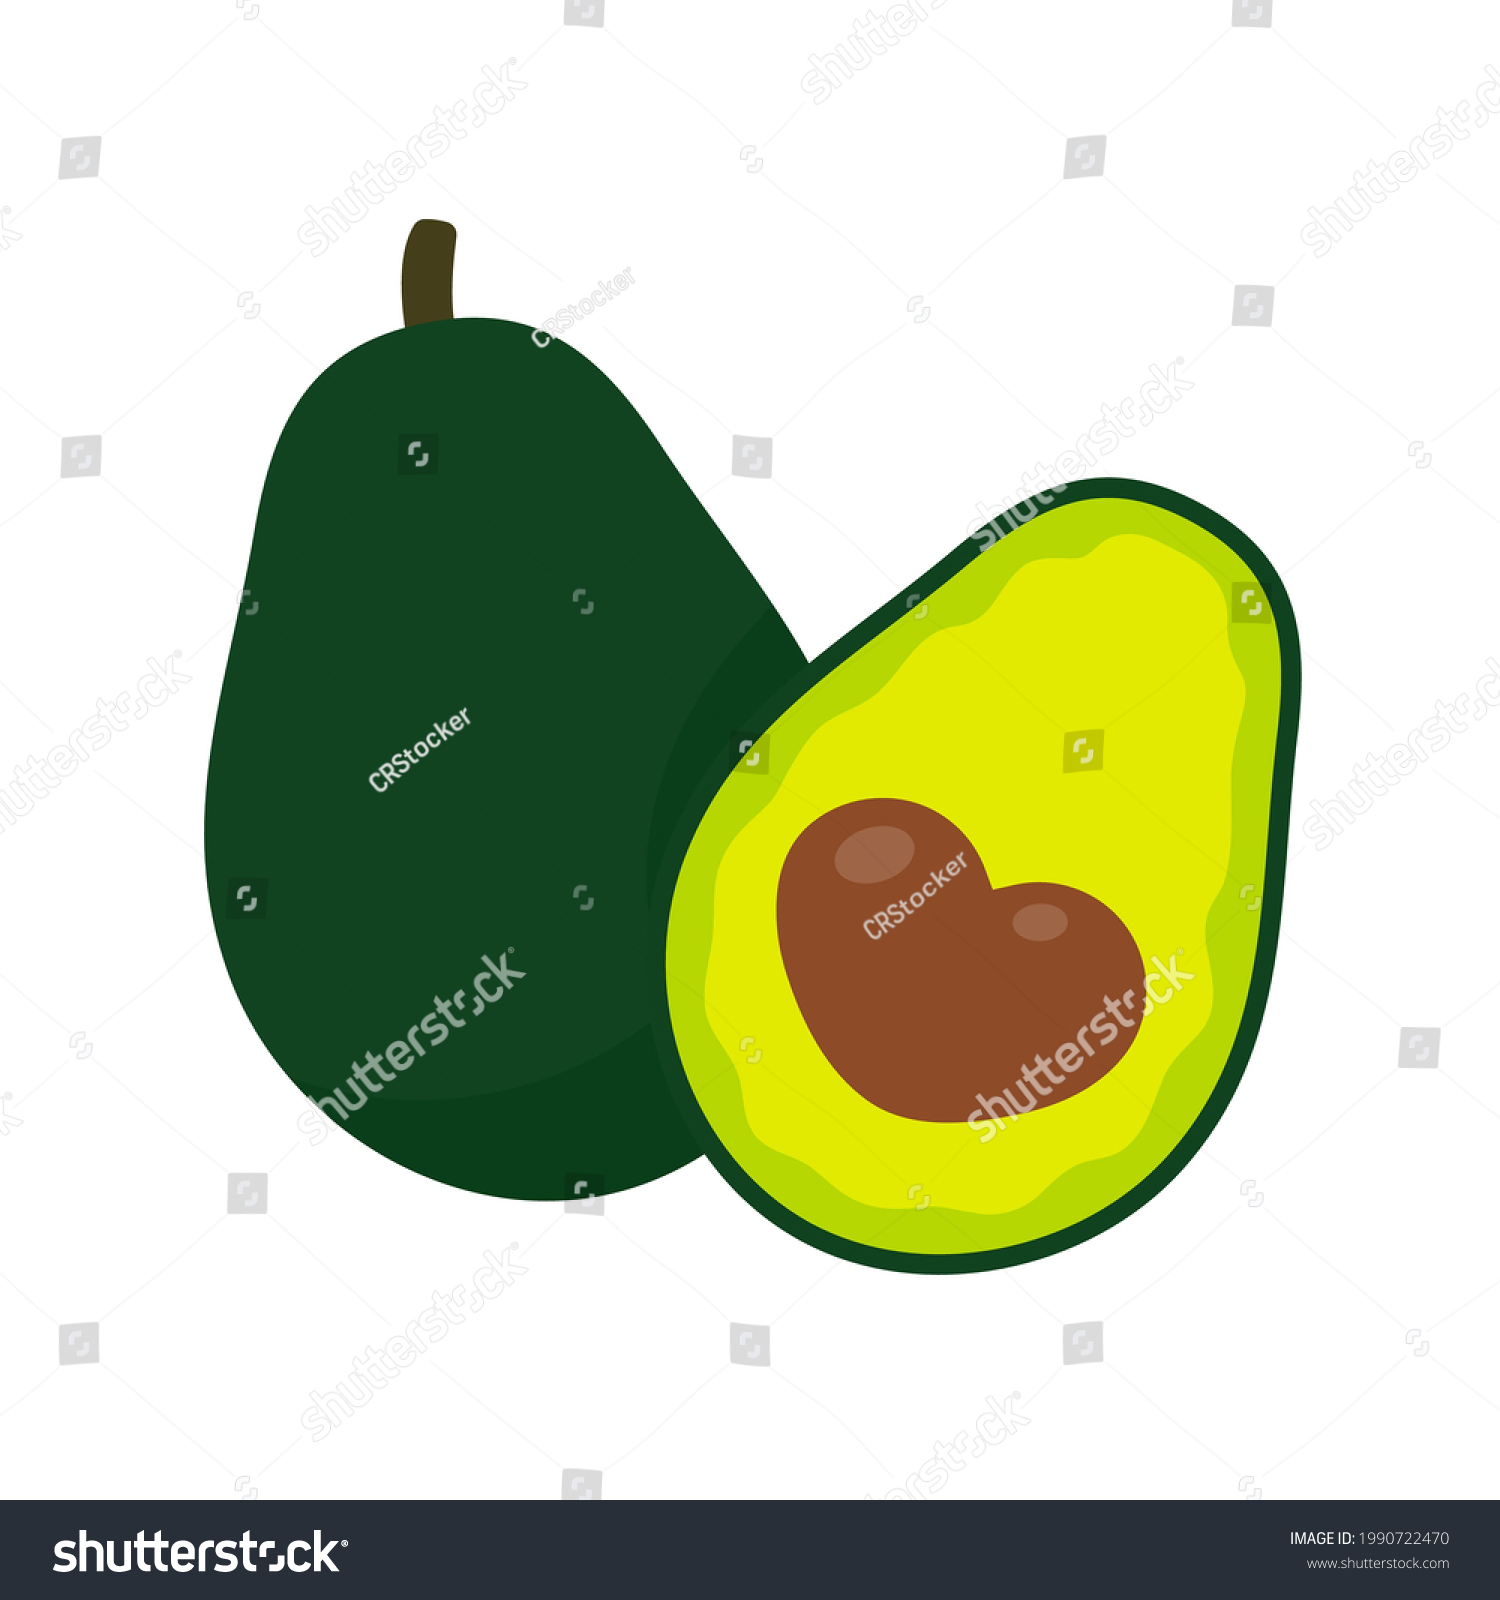 SVG of Avocado vector. avocado fruit cut into pieces There is a round seed inside. for health care svg